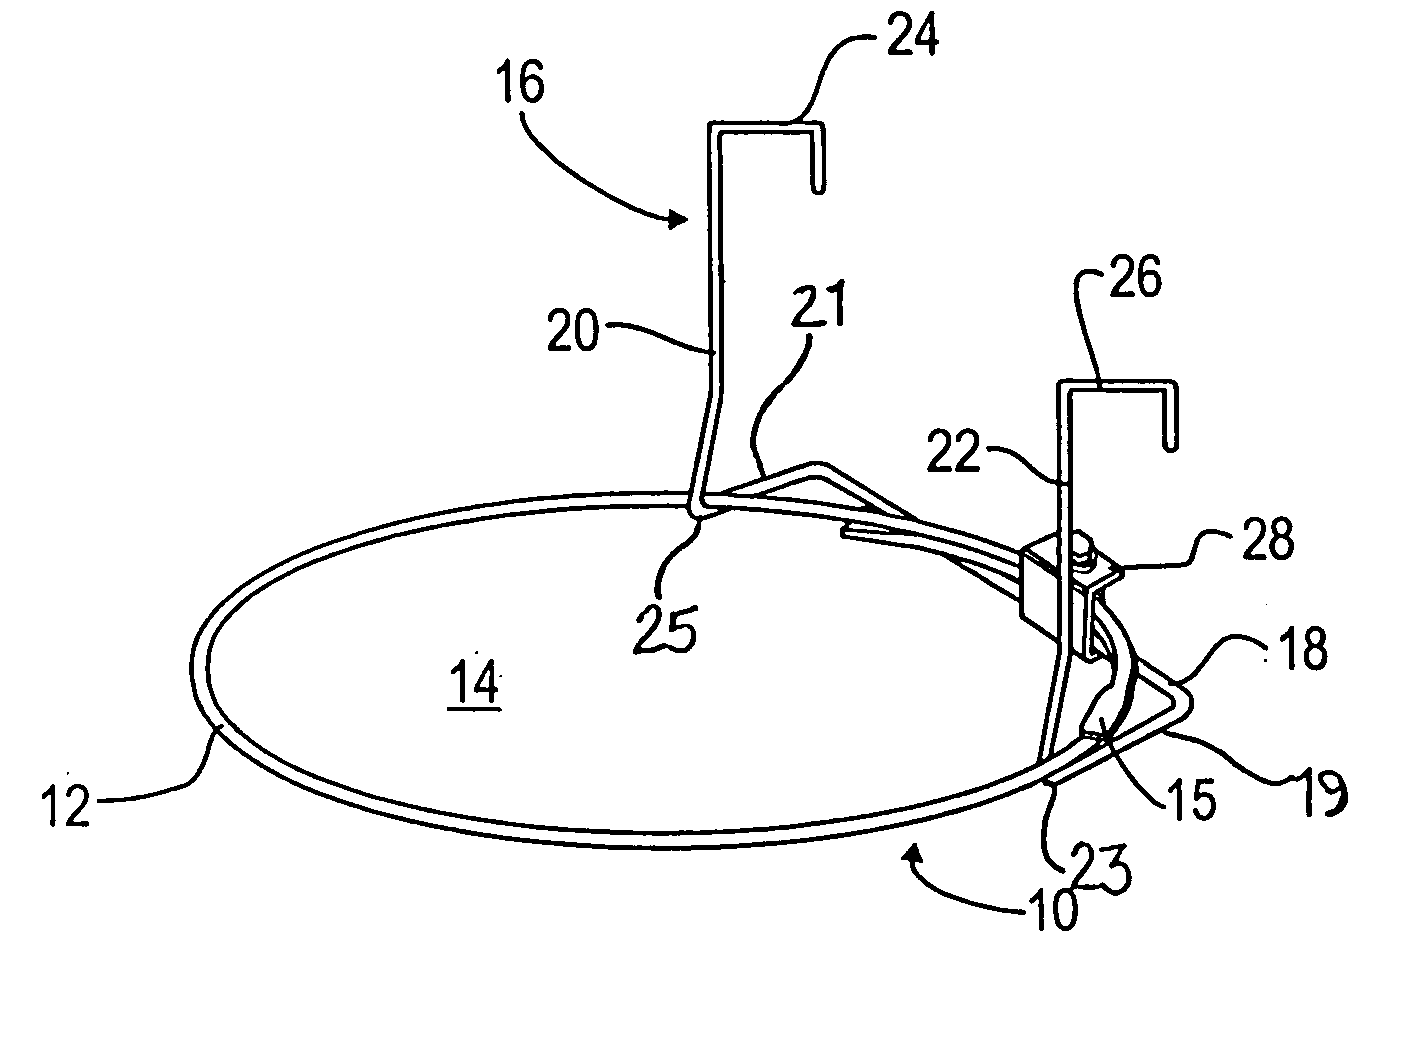 Receptacle support device for balcony or railing